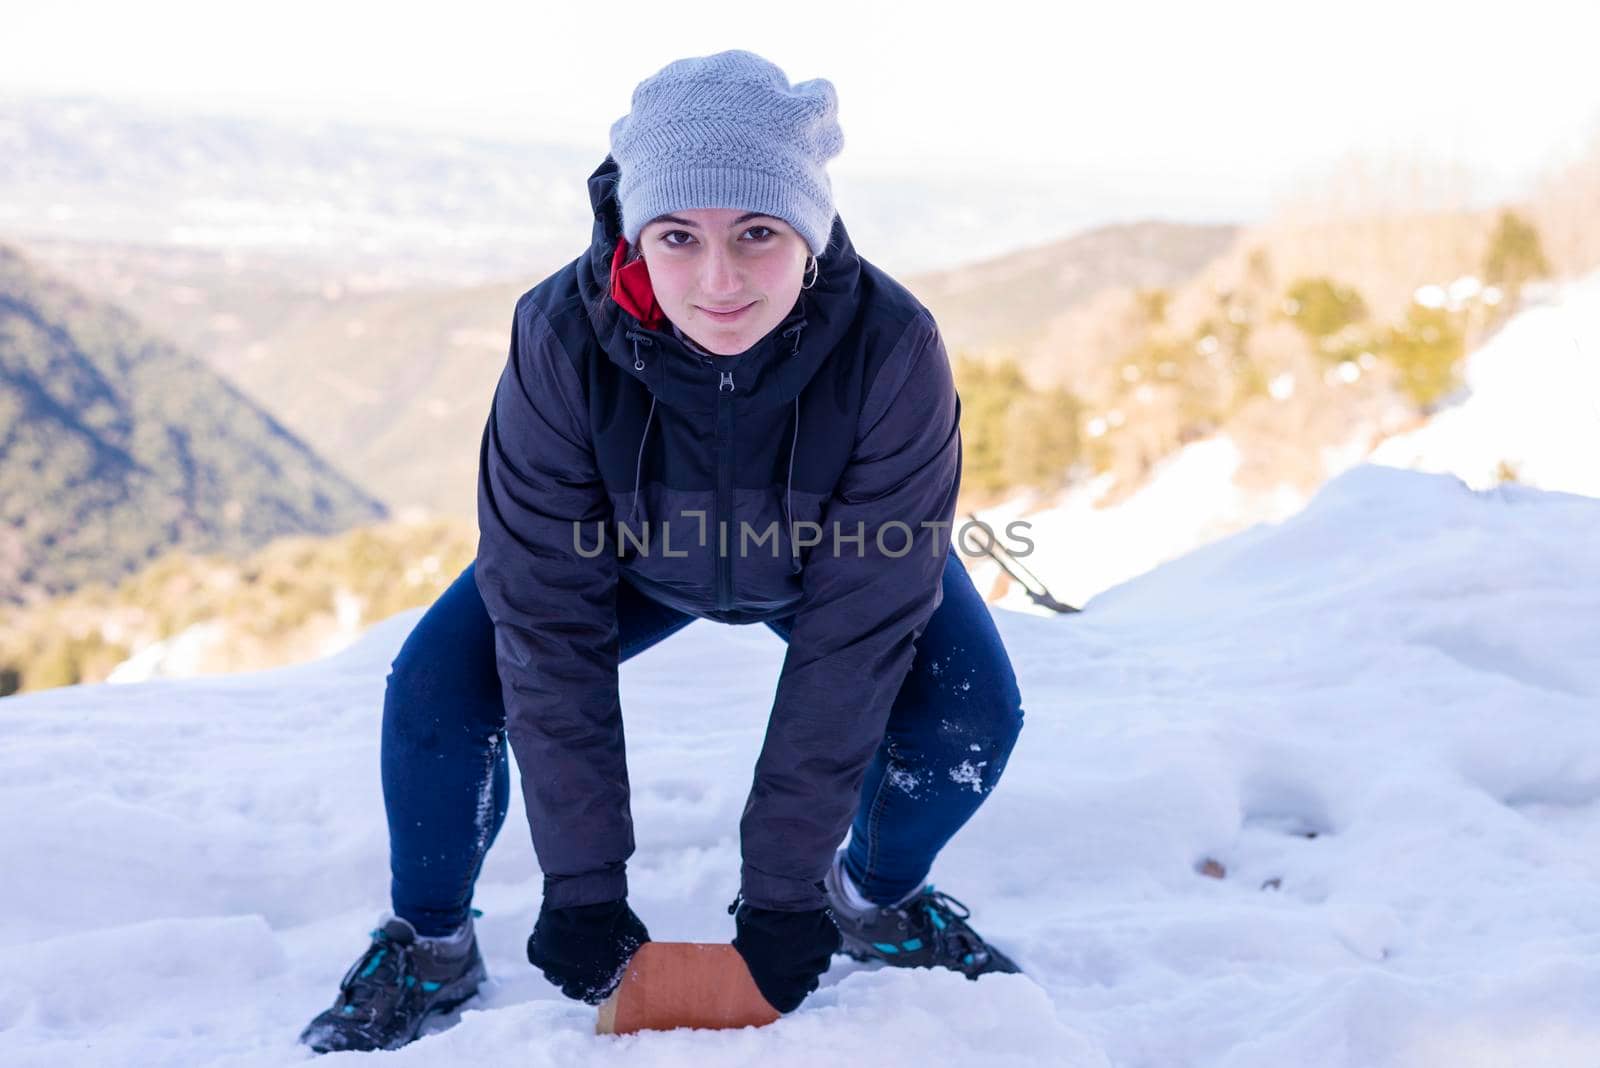 Young woman in snowy mountains at sunset in winter. by raferto1973